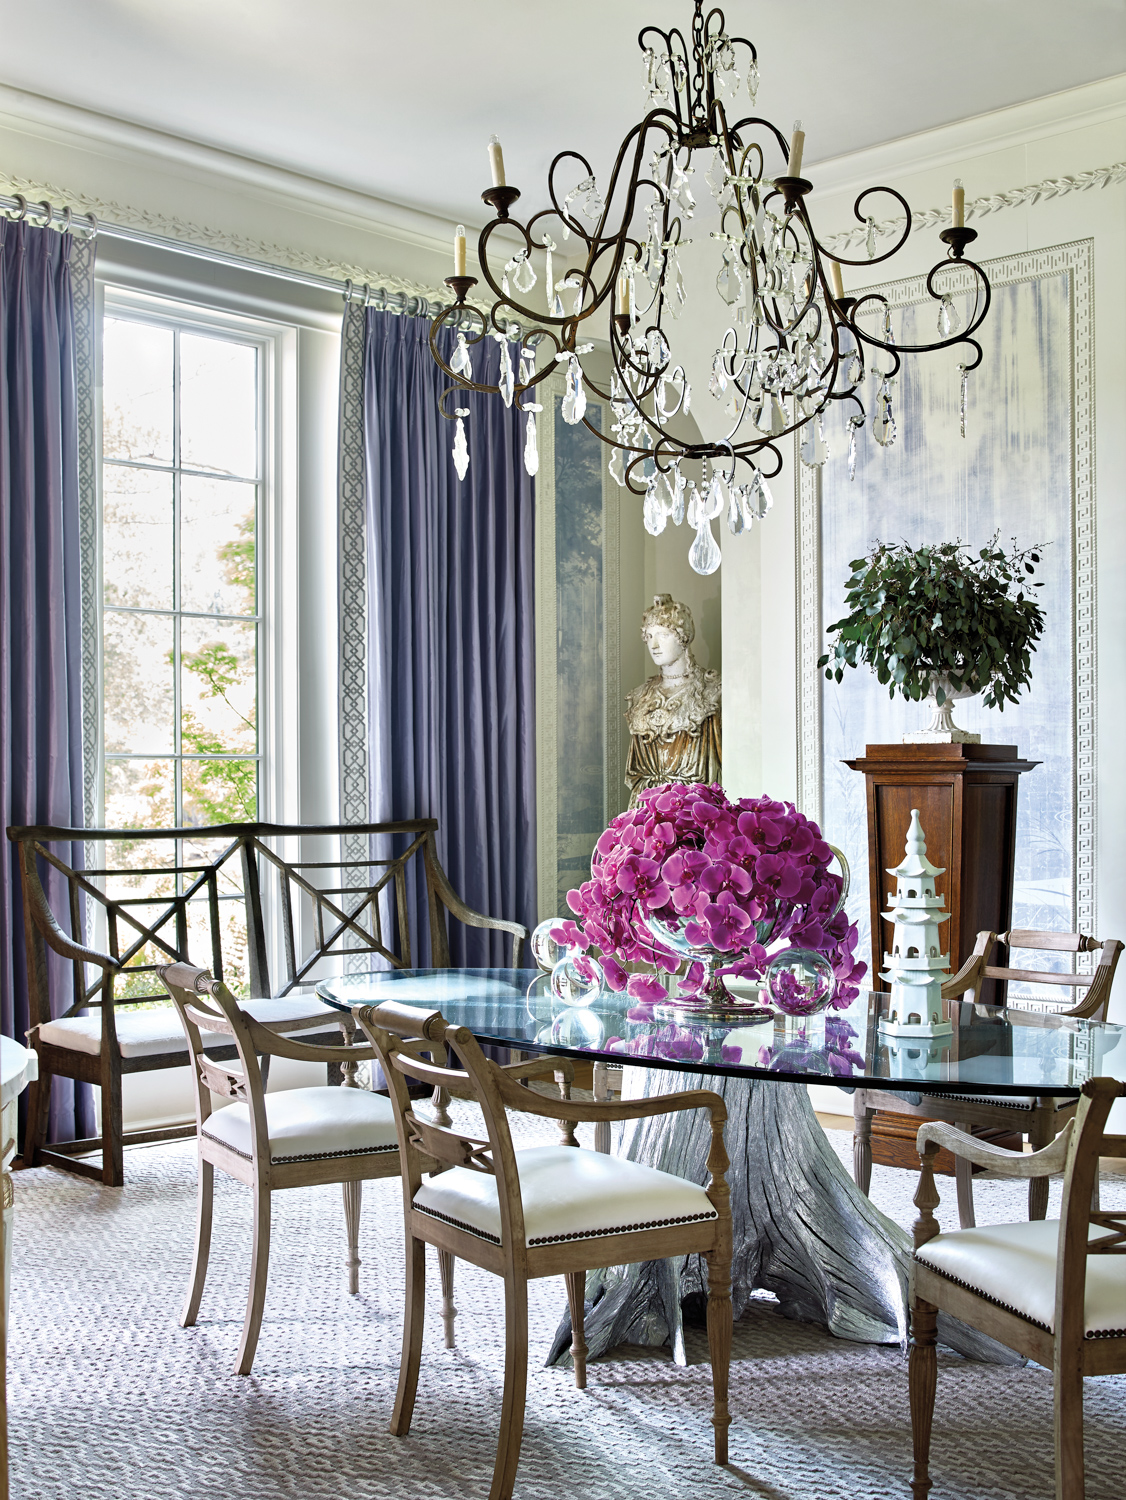 Dining room with lavender scenic...